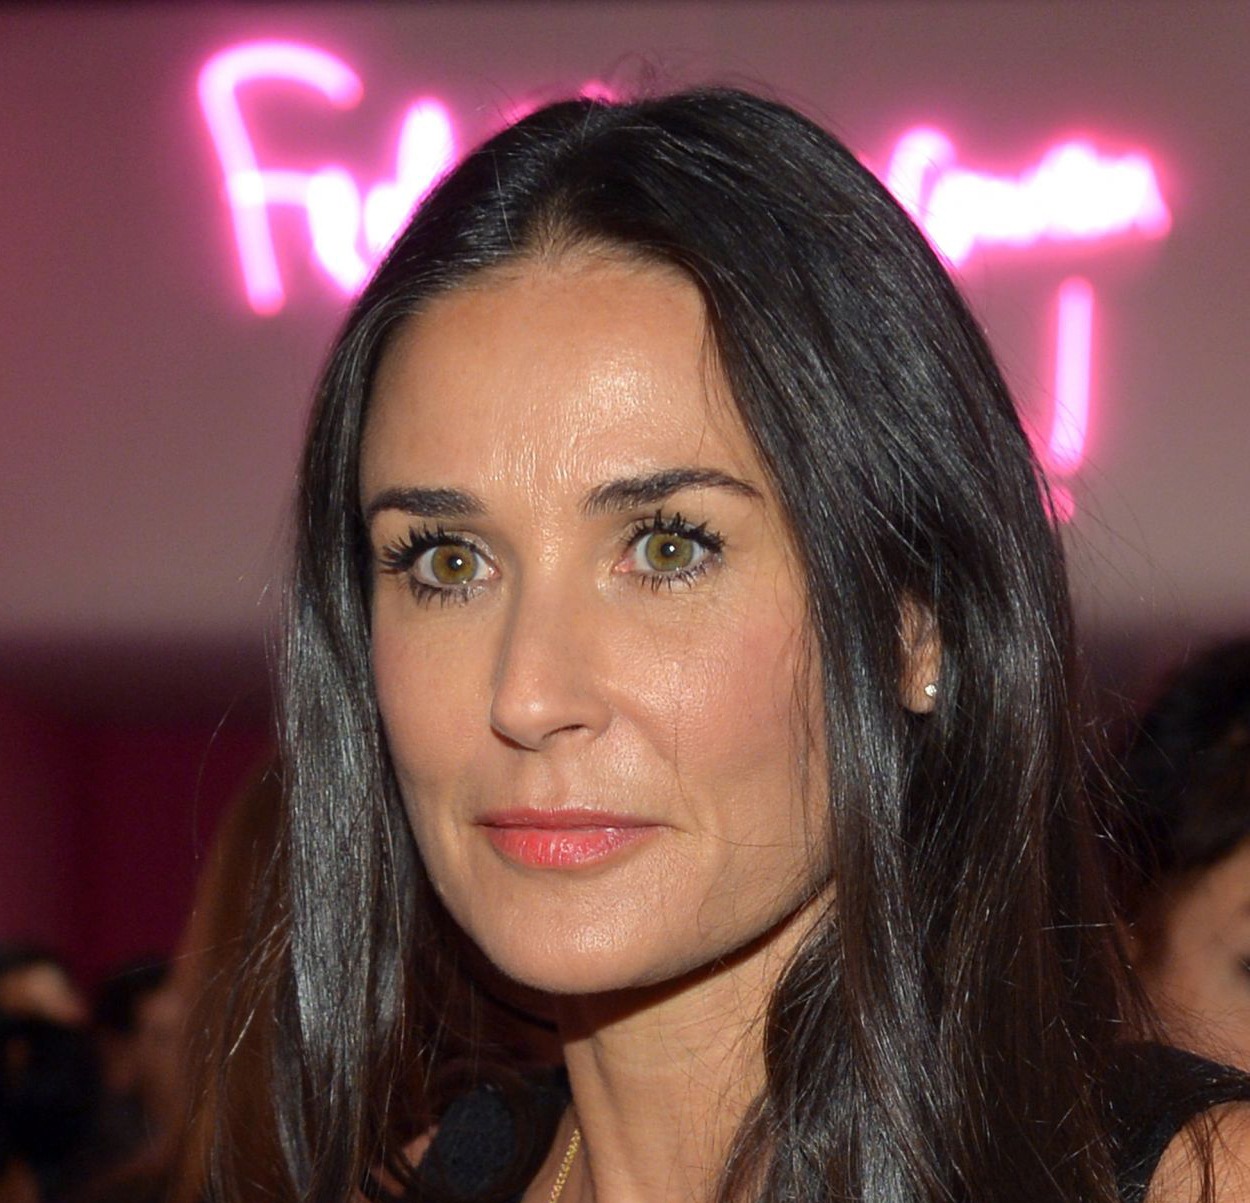  Demi Moore Facelift  Plastic Surgery Before and After Celebie